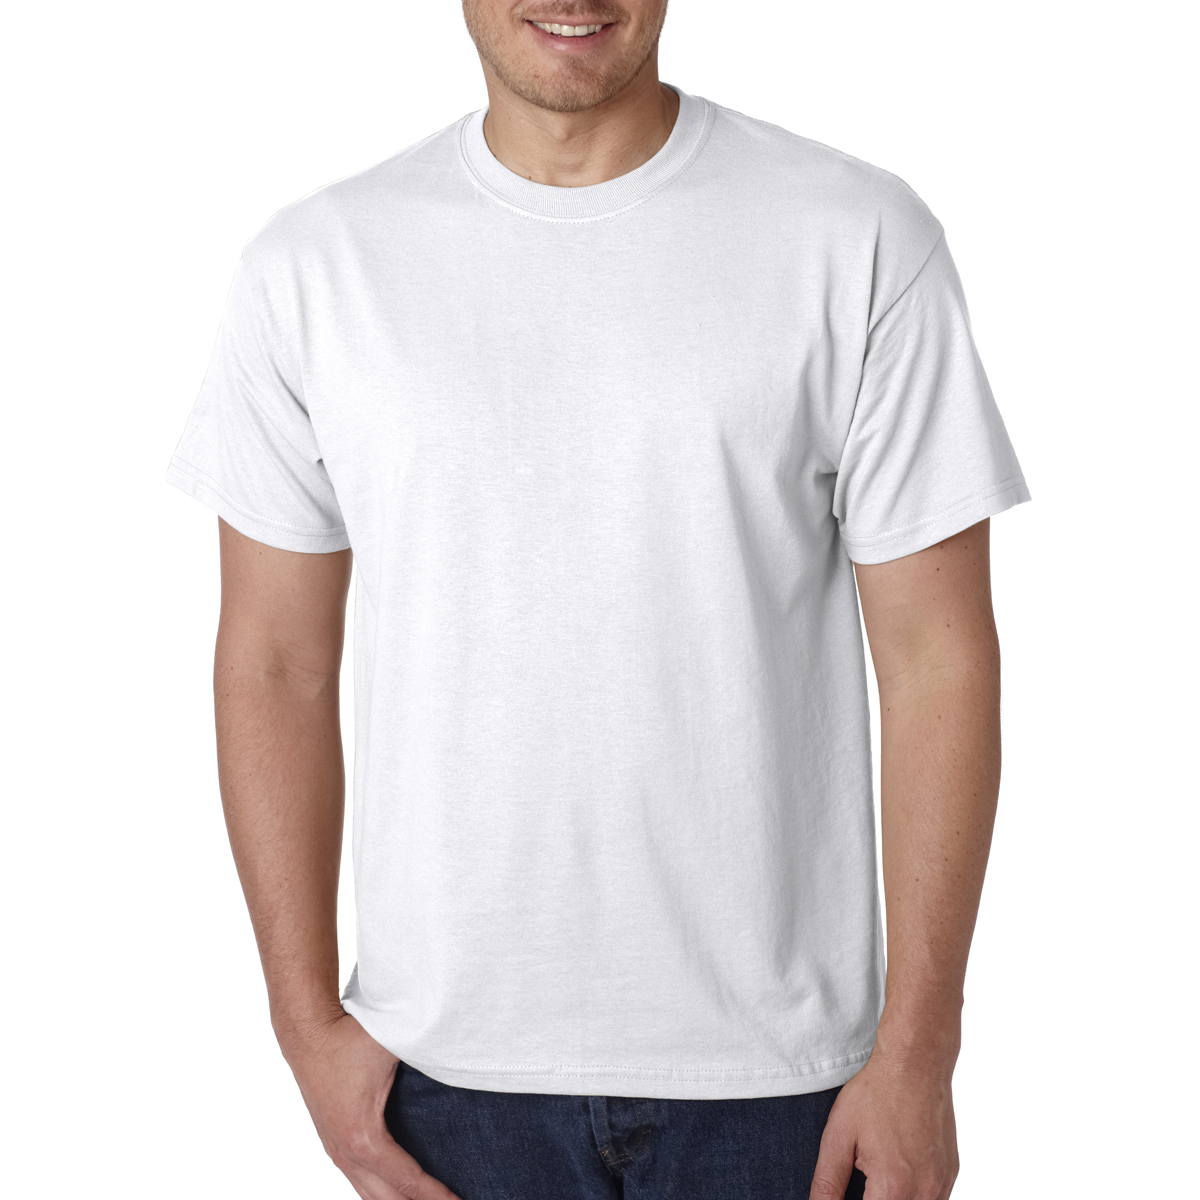 High Resolution Plain White T Shirt Front And Back George S Blog